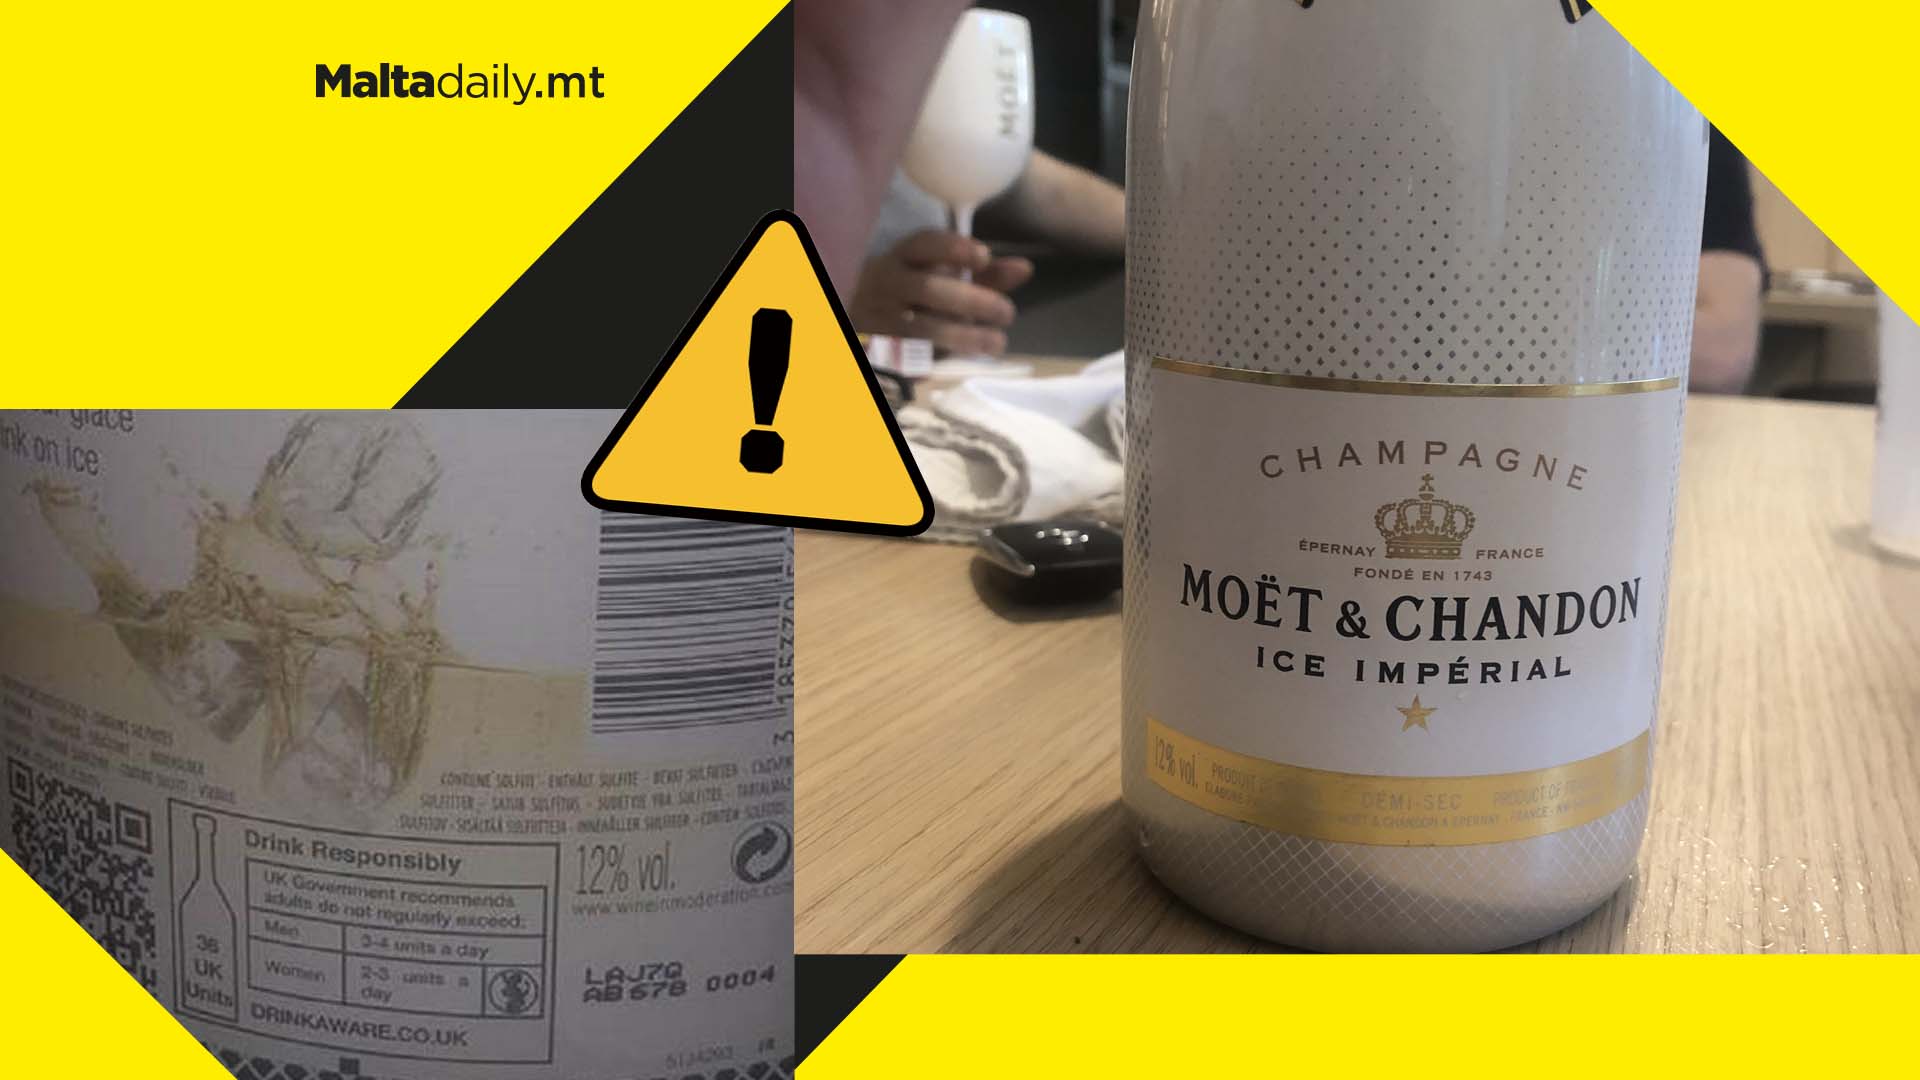 Champagne recalled due to potential presence of ecstasy; no incidents in Malta so far